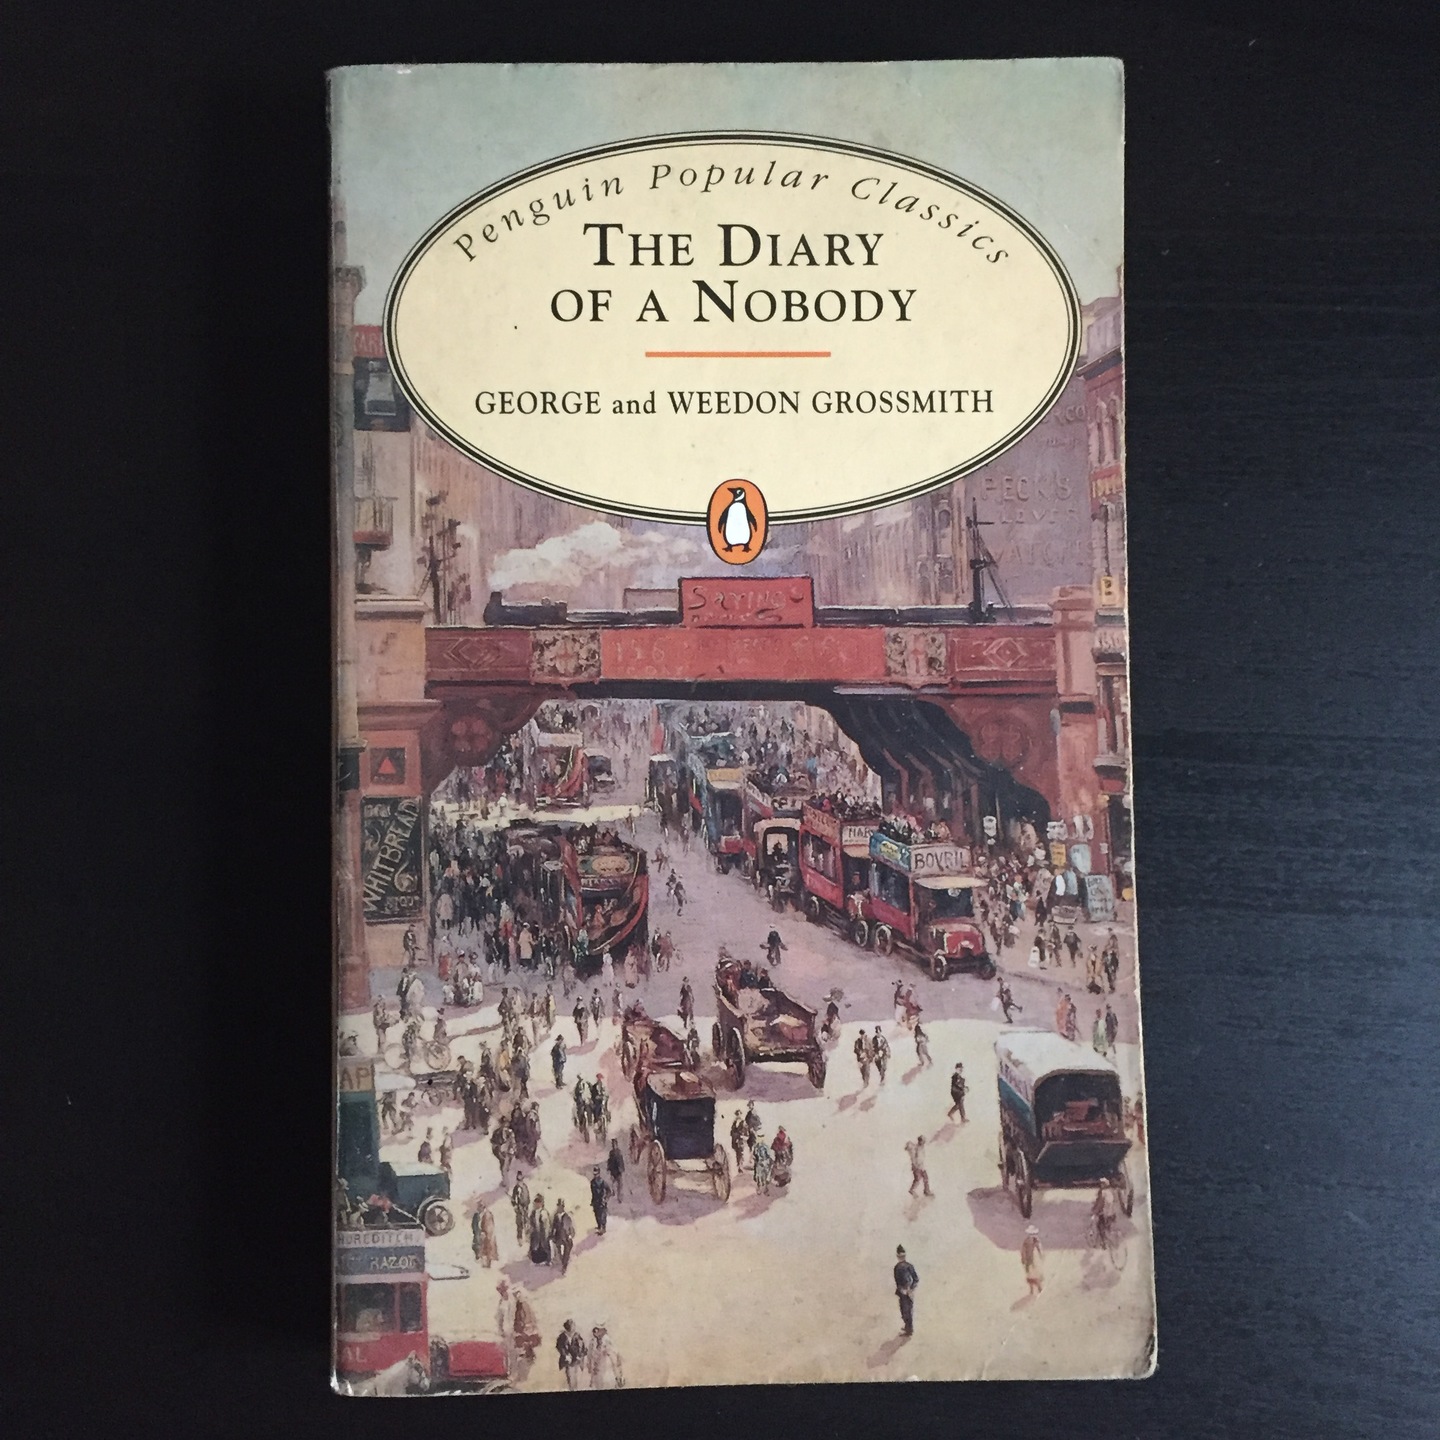 The Diary of a Nobody by George and Weedon Grossmith [Paperback]